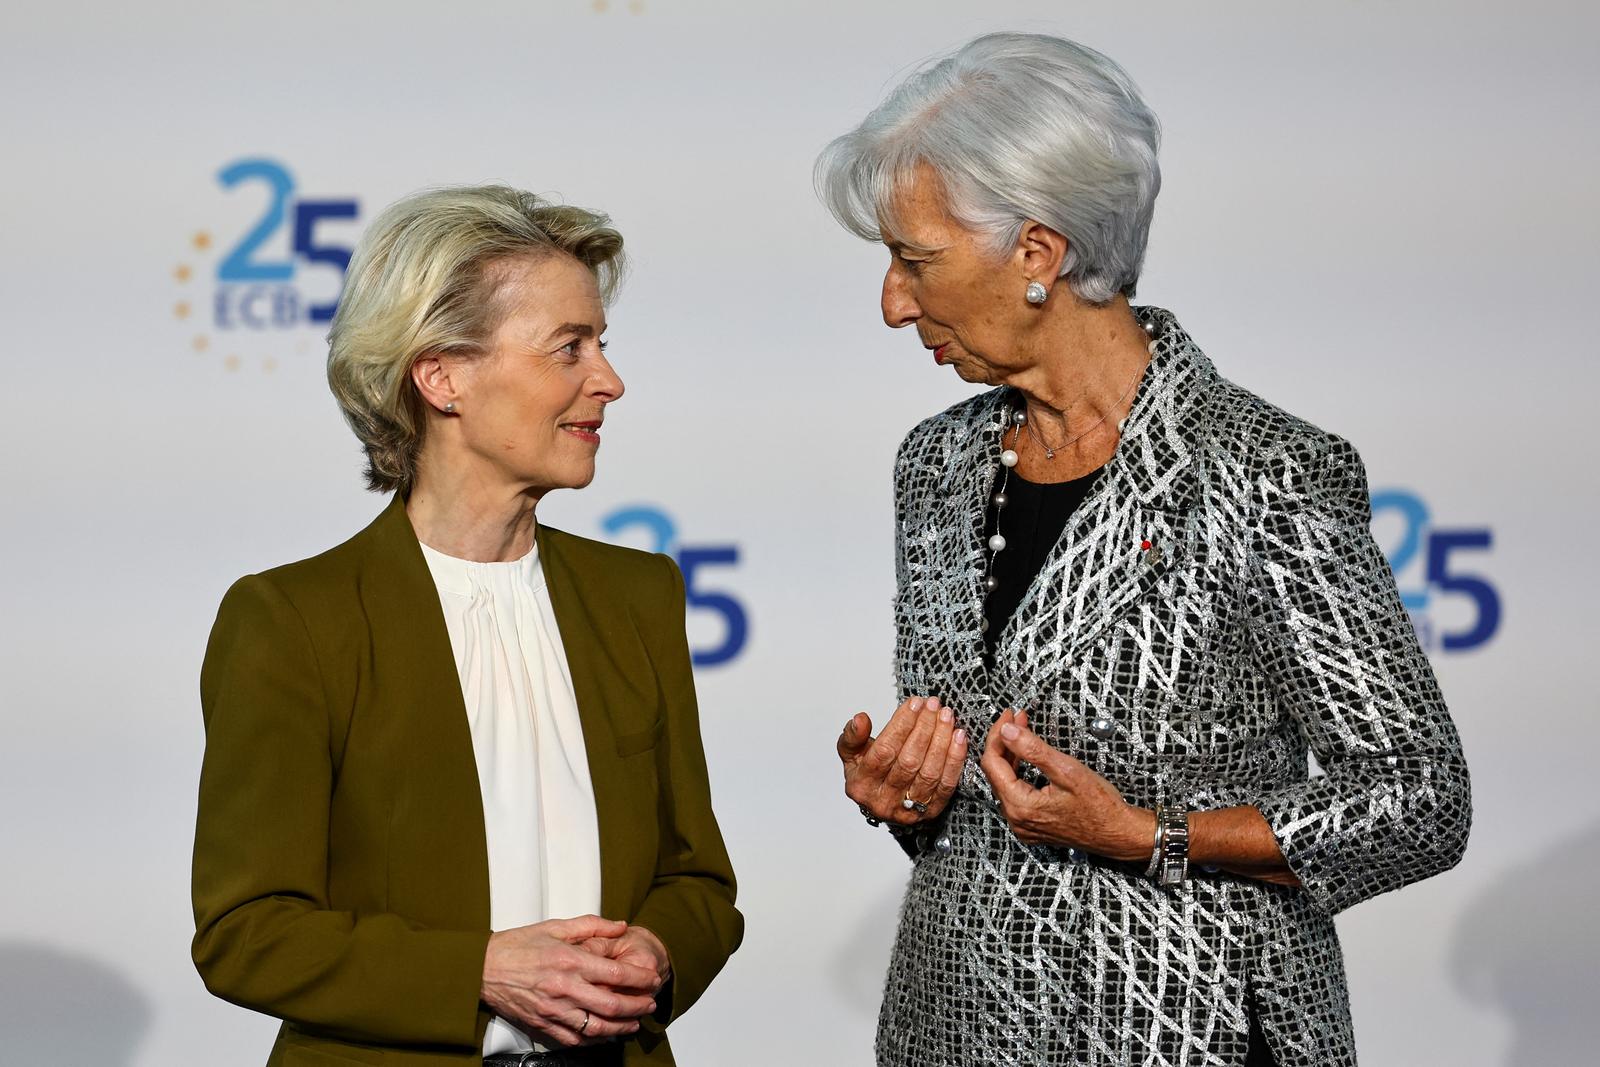 European Central Bank president Christine Lagarde welcomes President of the European Commission Ursula von der Leyen during a ceremony to celebrate the 25th anniversary of the ECB, in Frankfurt, Germany, May 24, 2023. REUTERS/Kai Pfaffenbach Photo: Kai Pfaffenbach/REUTERS